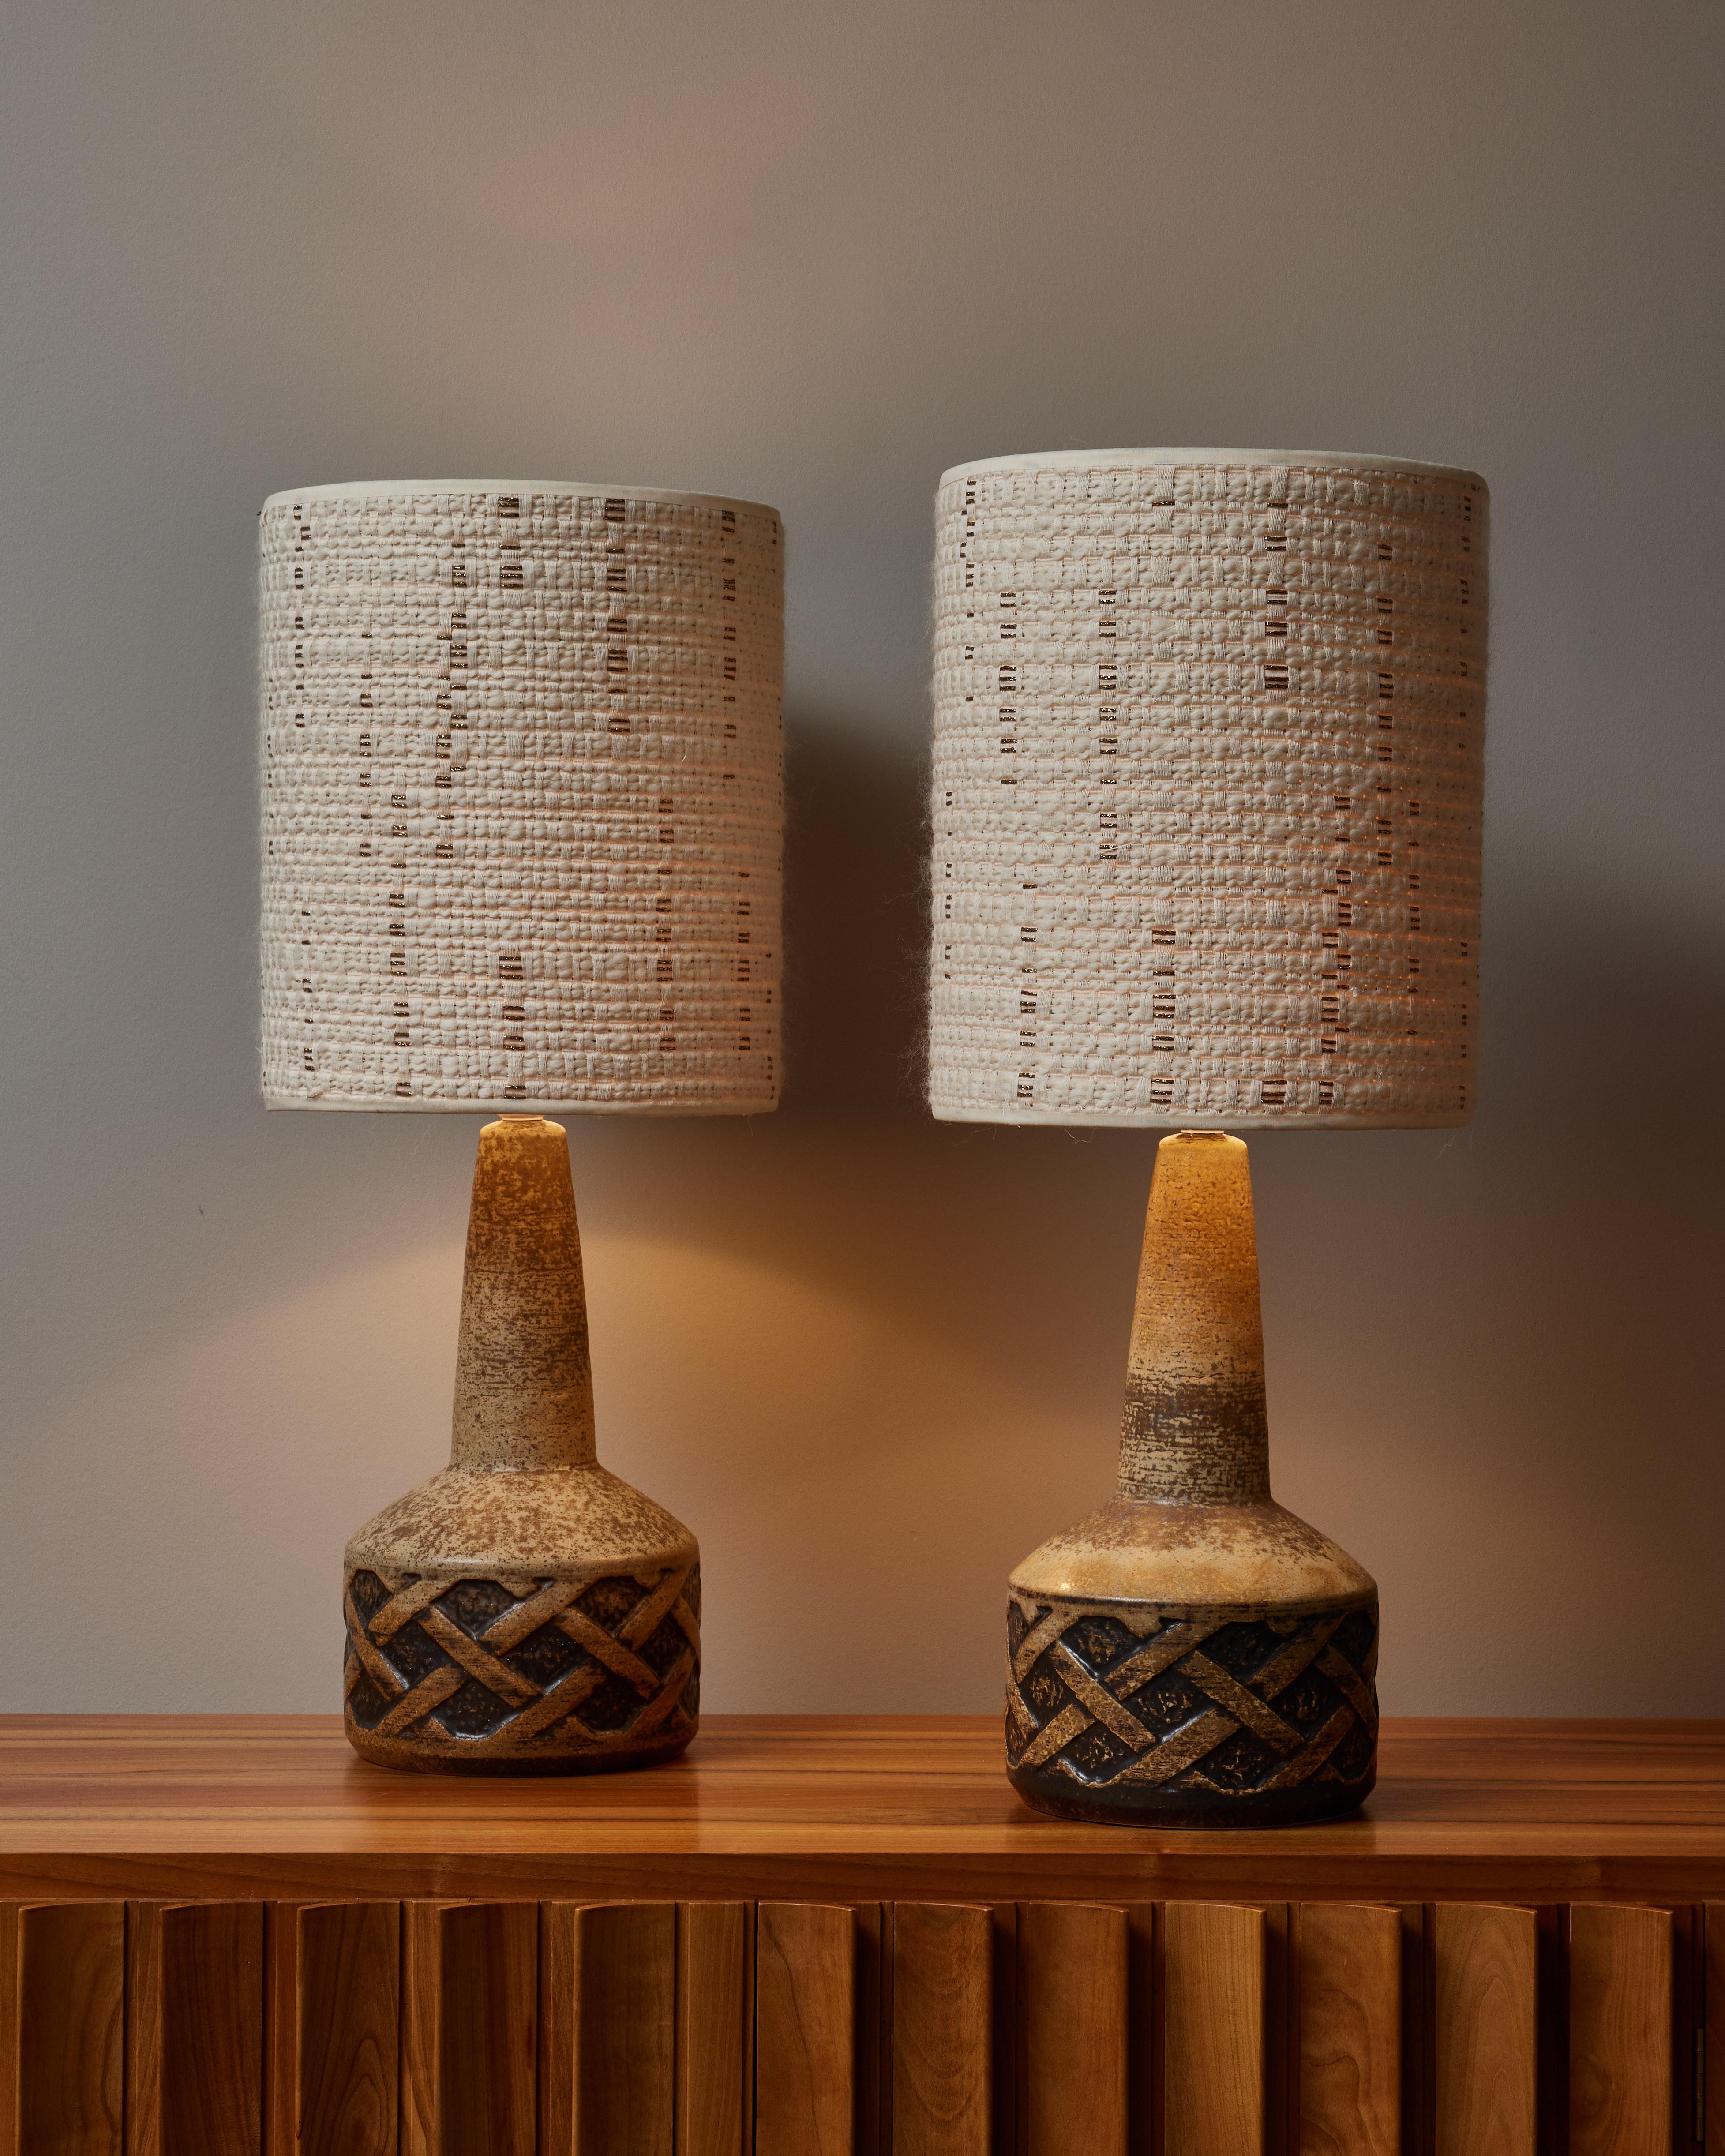 Pair of table lamps made of ceramic with a textured twisted motif by the makers from Søholm Stentøj. New lampshades with fabric from Dedar.

The origin of Søholm Stentøj (Soholm’s sandstone) dates back to the first half of the 17th century and the